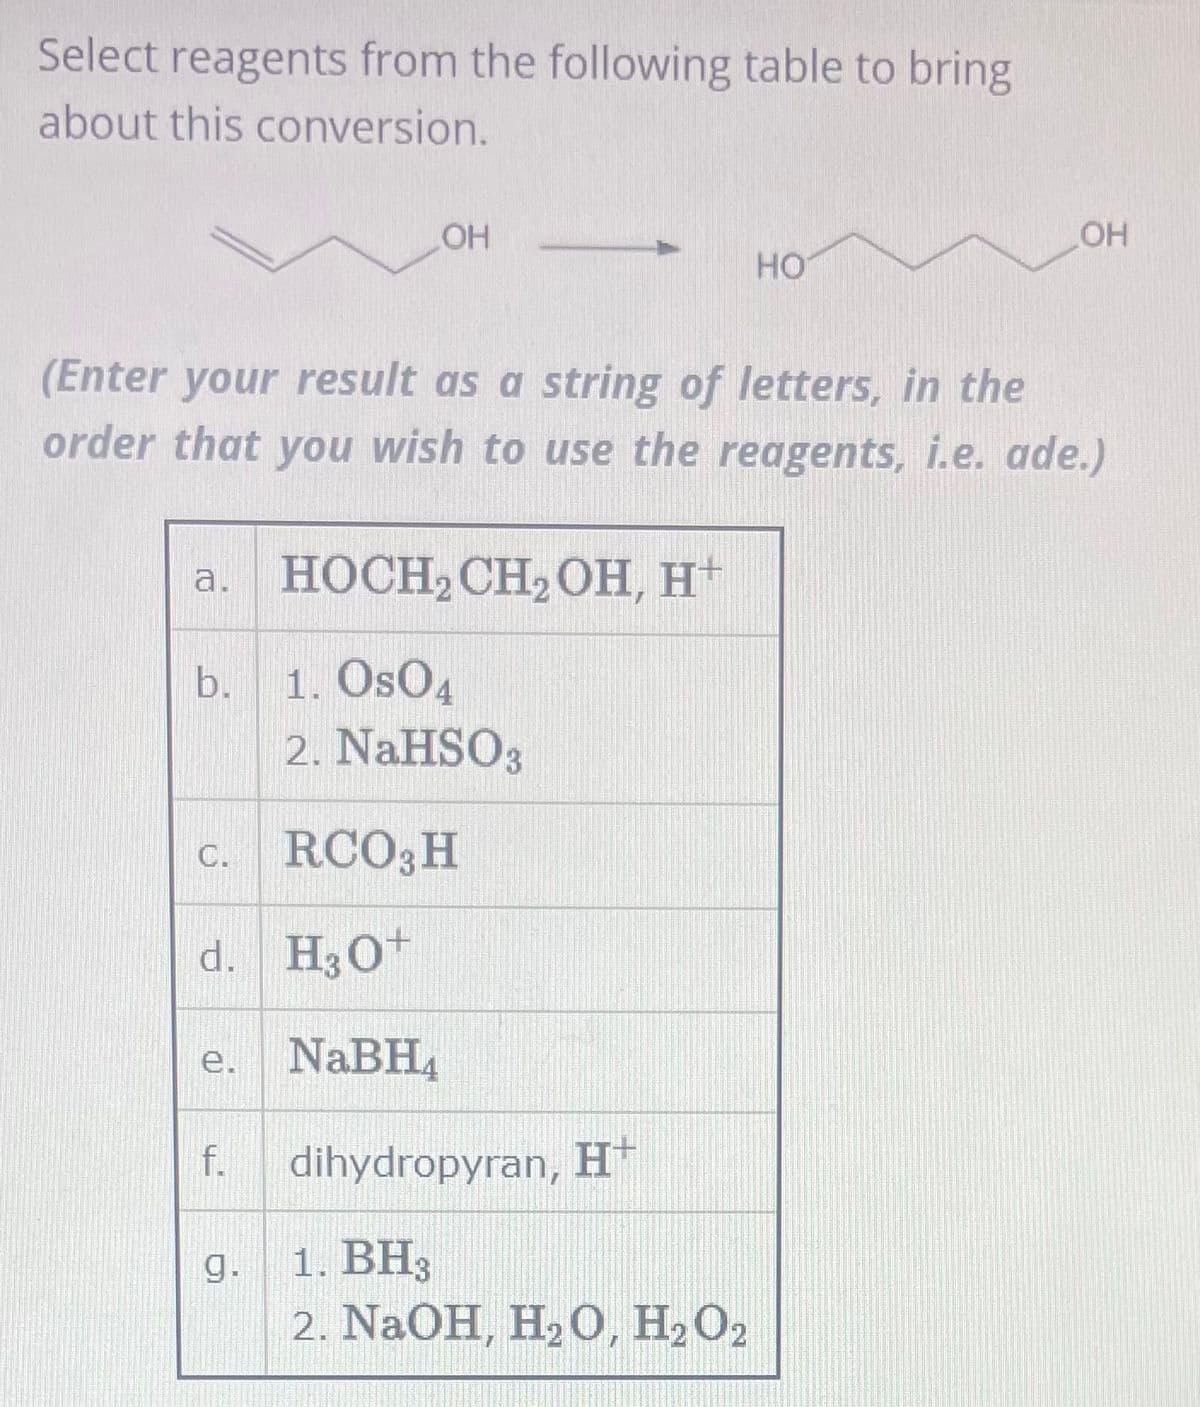 Select reagents from the following table to bring
about this conversion.
a. HOCH₂ CH₂ OH, H+
1. Os04
2. NaHSO3
RCO3 H
H3O+
NaBH₁
b.
(Enter your result as a string of letters, in the
order that you wish to use the reagents, i.e. ade.)
C.
d.
e.
LOH
f.
g.
HO
dihydropyran, H+
1. BH3
2. NaOH, H₂O, H2₂ O2
OH